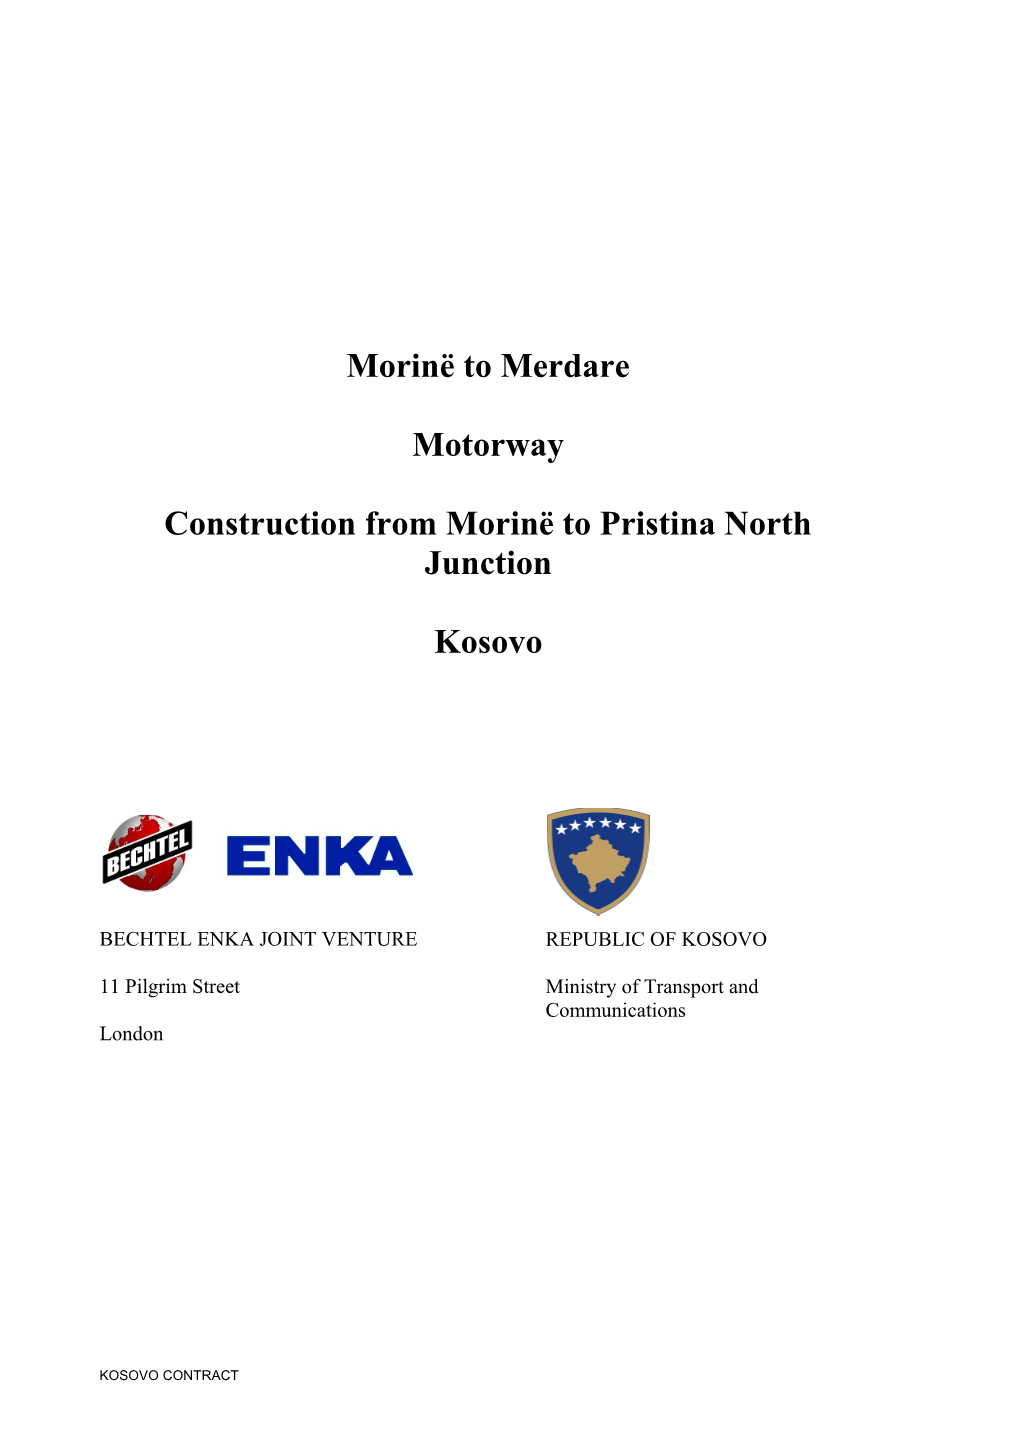 Construction from Morinë to Pristina North Junction